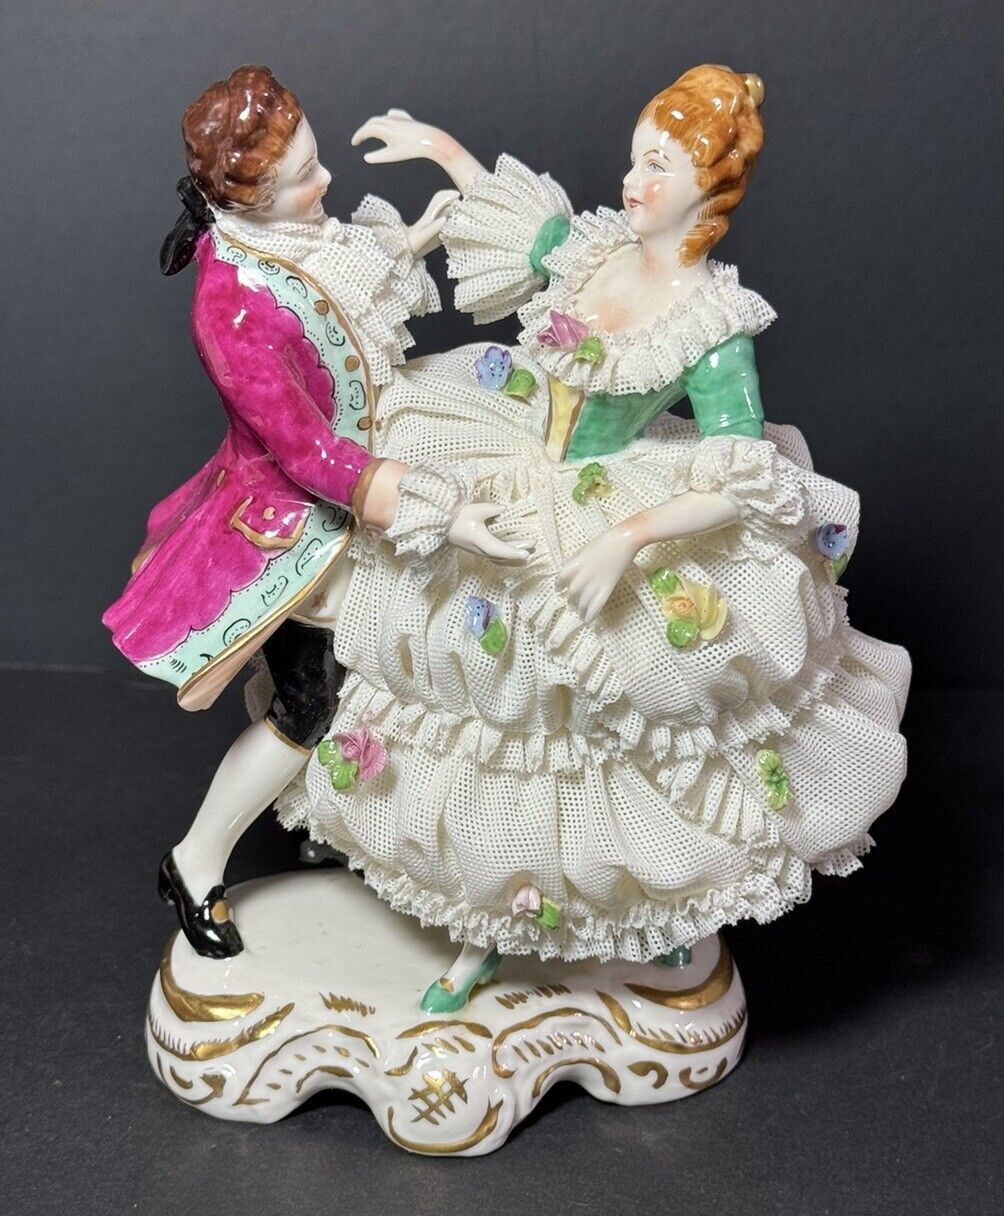 Antique DRESDEN PORCELAIN LACE COURTING COUPLE Waltz Figurine VOLKSTEDT GERMANY